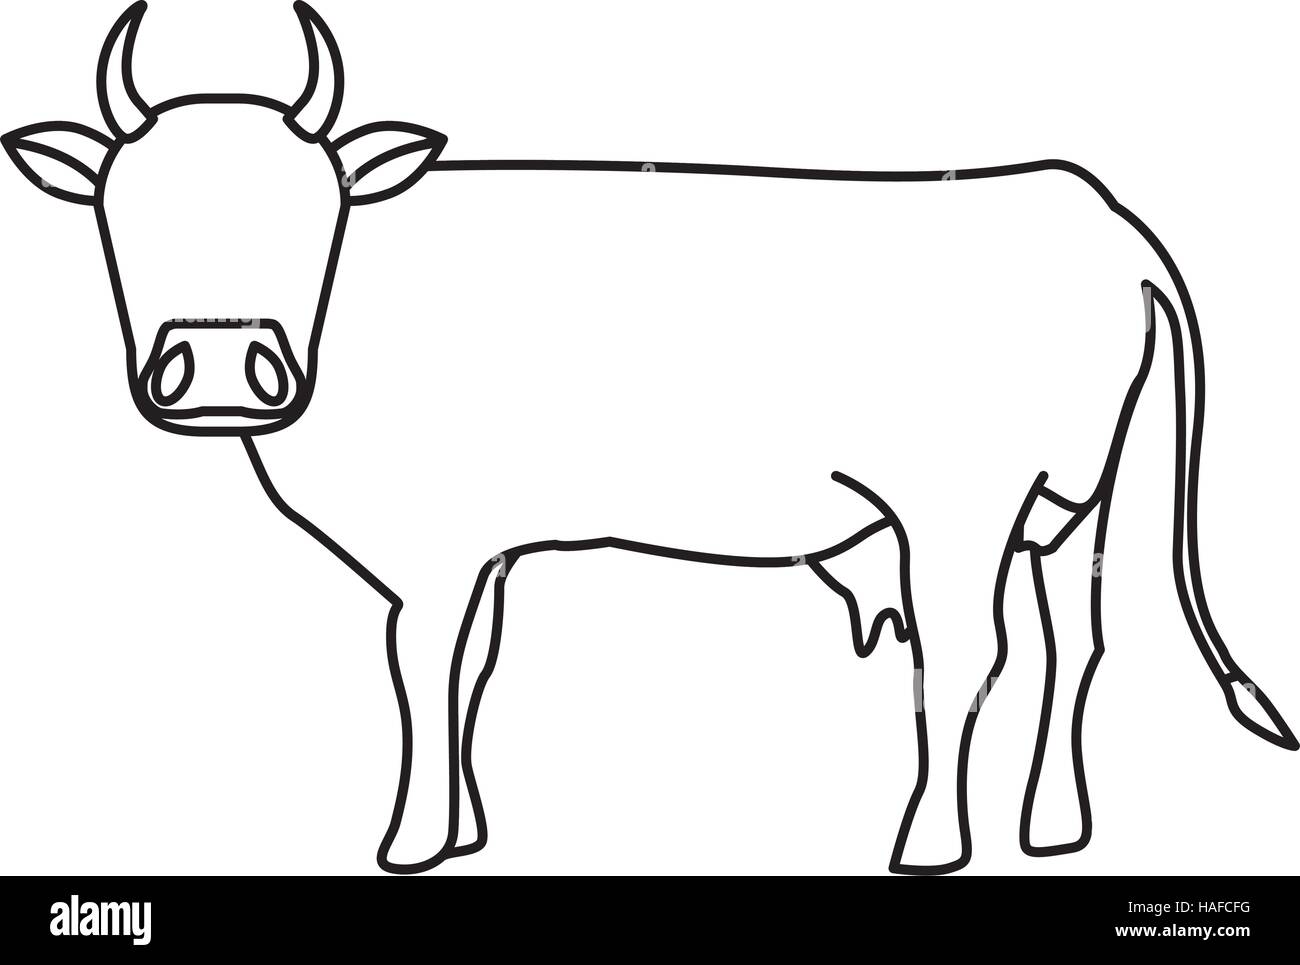 1 The cows cosmic form A typical modern Indian calendar art style of   Download Scientific Diagram